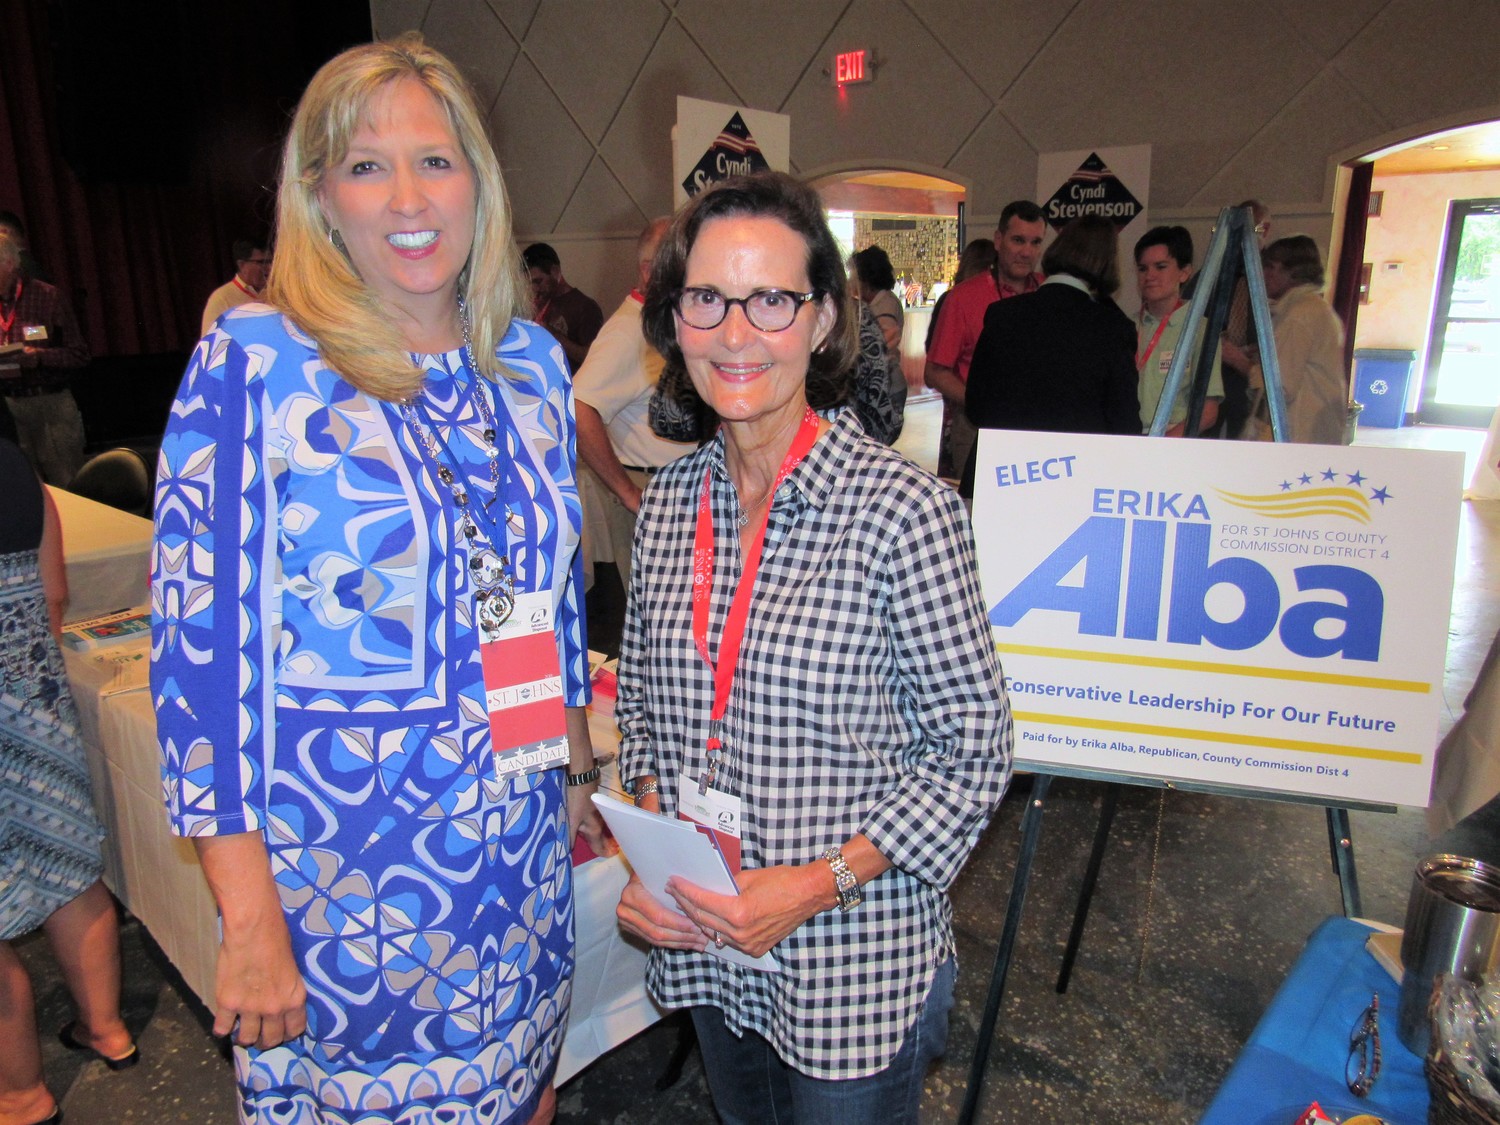 District 4 County Commission candidate Erika Alba poses with Jayne Evans at her table.